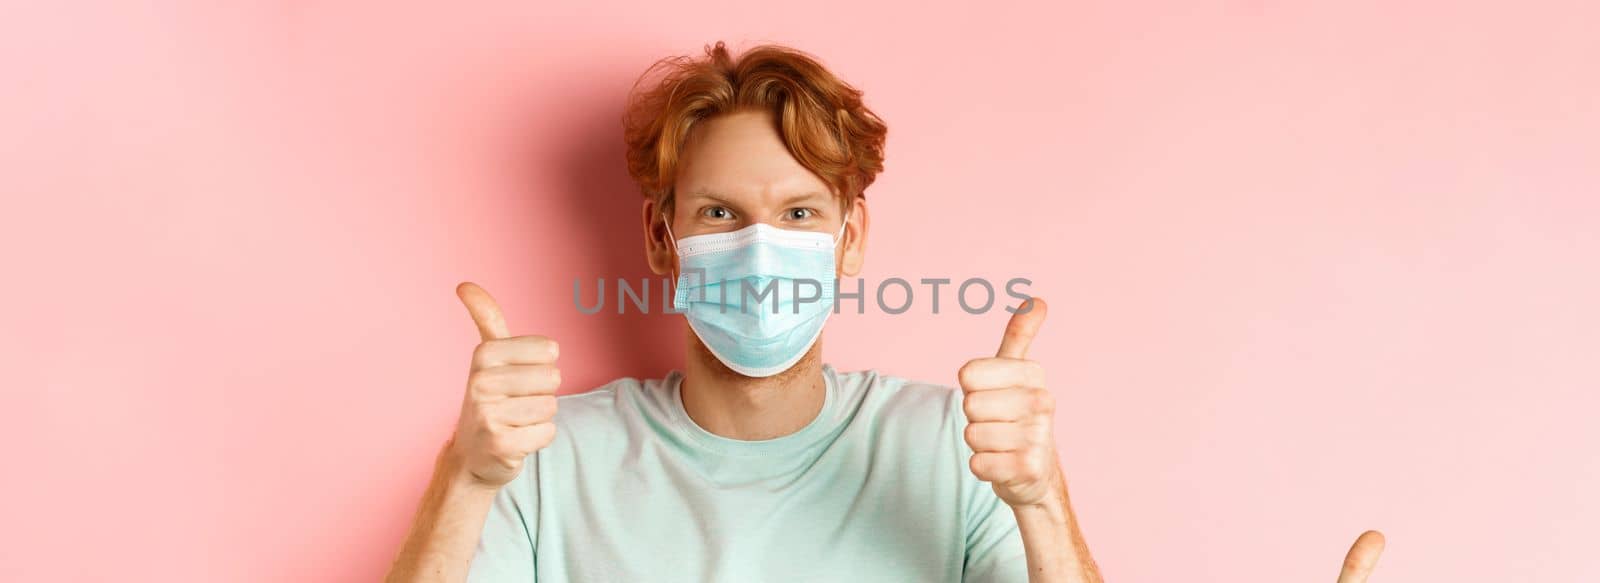 Covid-19 and pandemic concept. Handsome guy with messy ginger hair, wearing medical mask on face and showing thumbs up, standing over pink background.